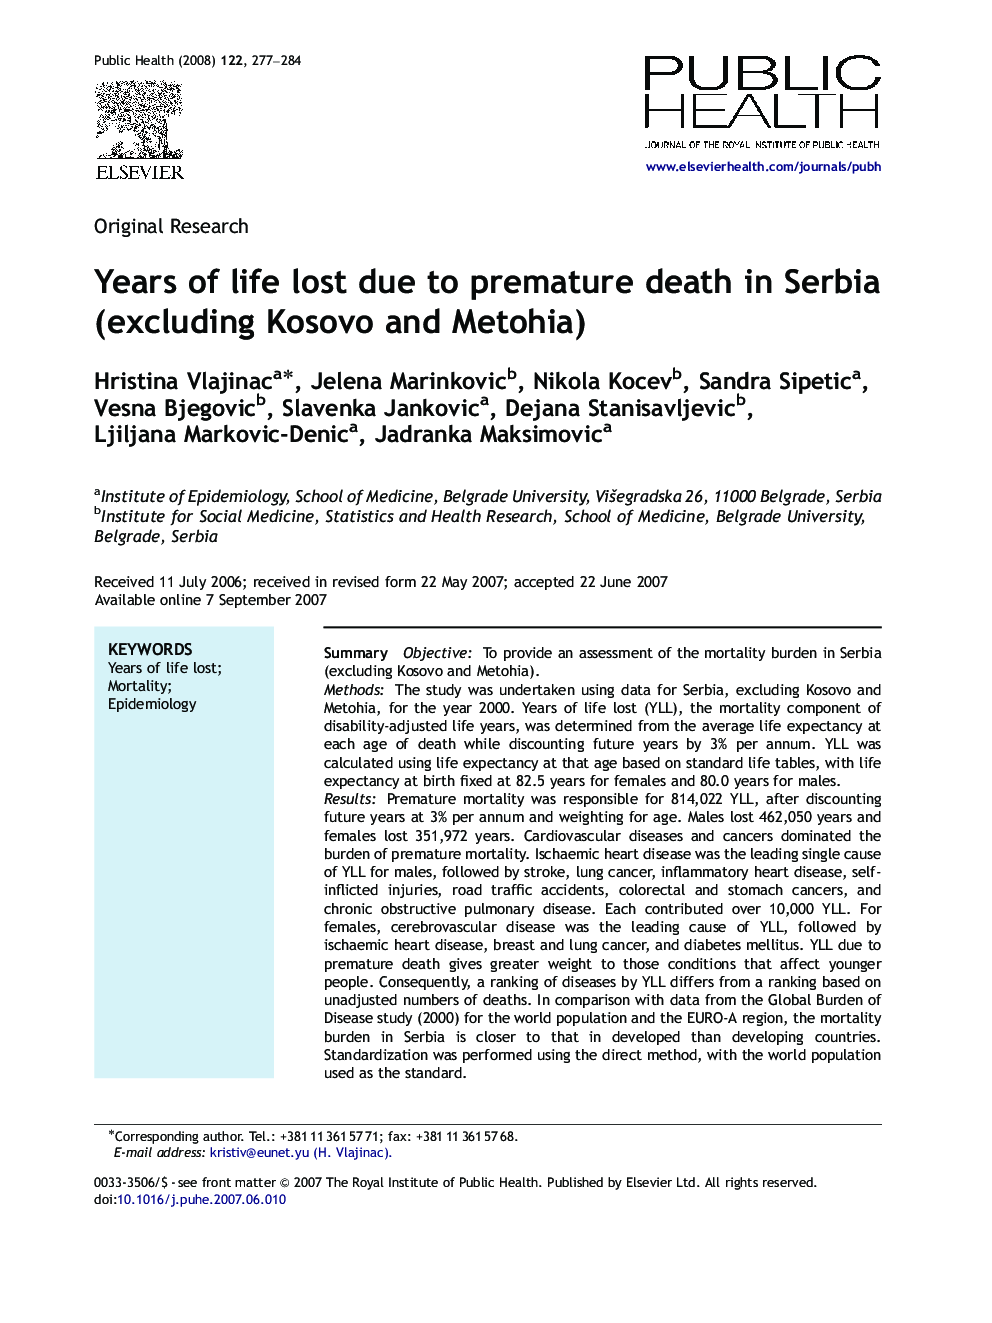 Years of life lost due to premature death in Serbia (excluding Kosovo and Metohia)